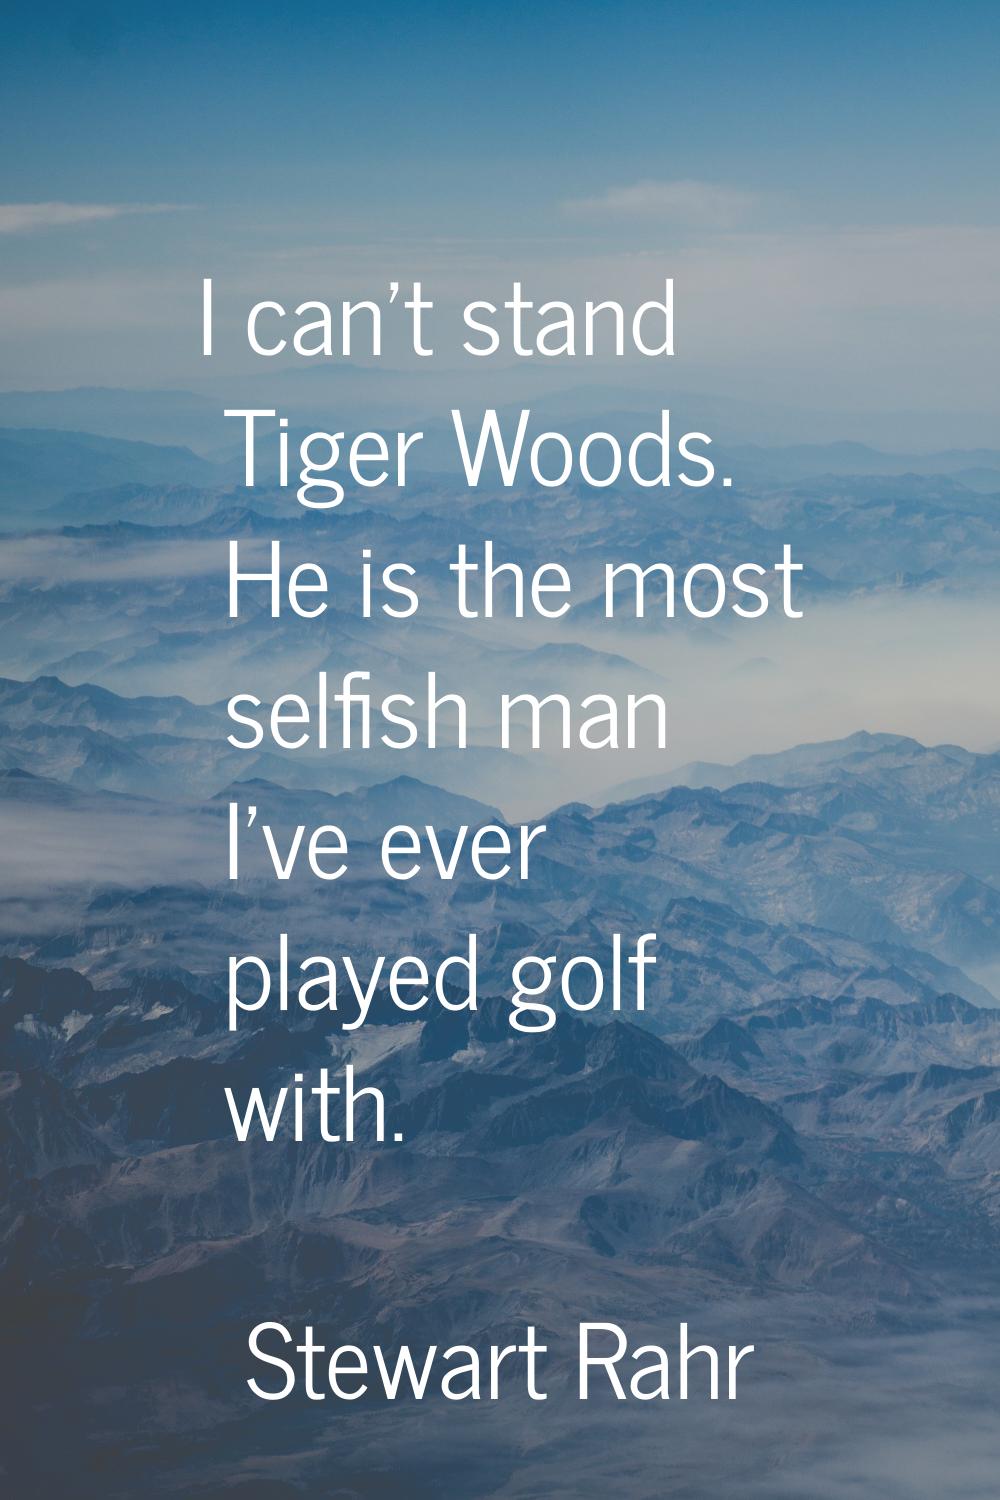 I can't stand Tiger Woods. He is the most selfish man I've ever played golf with.